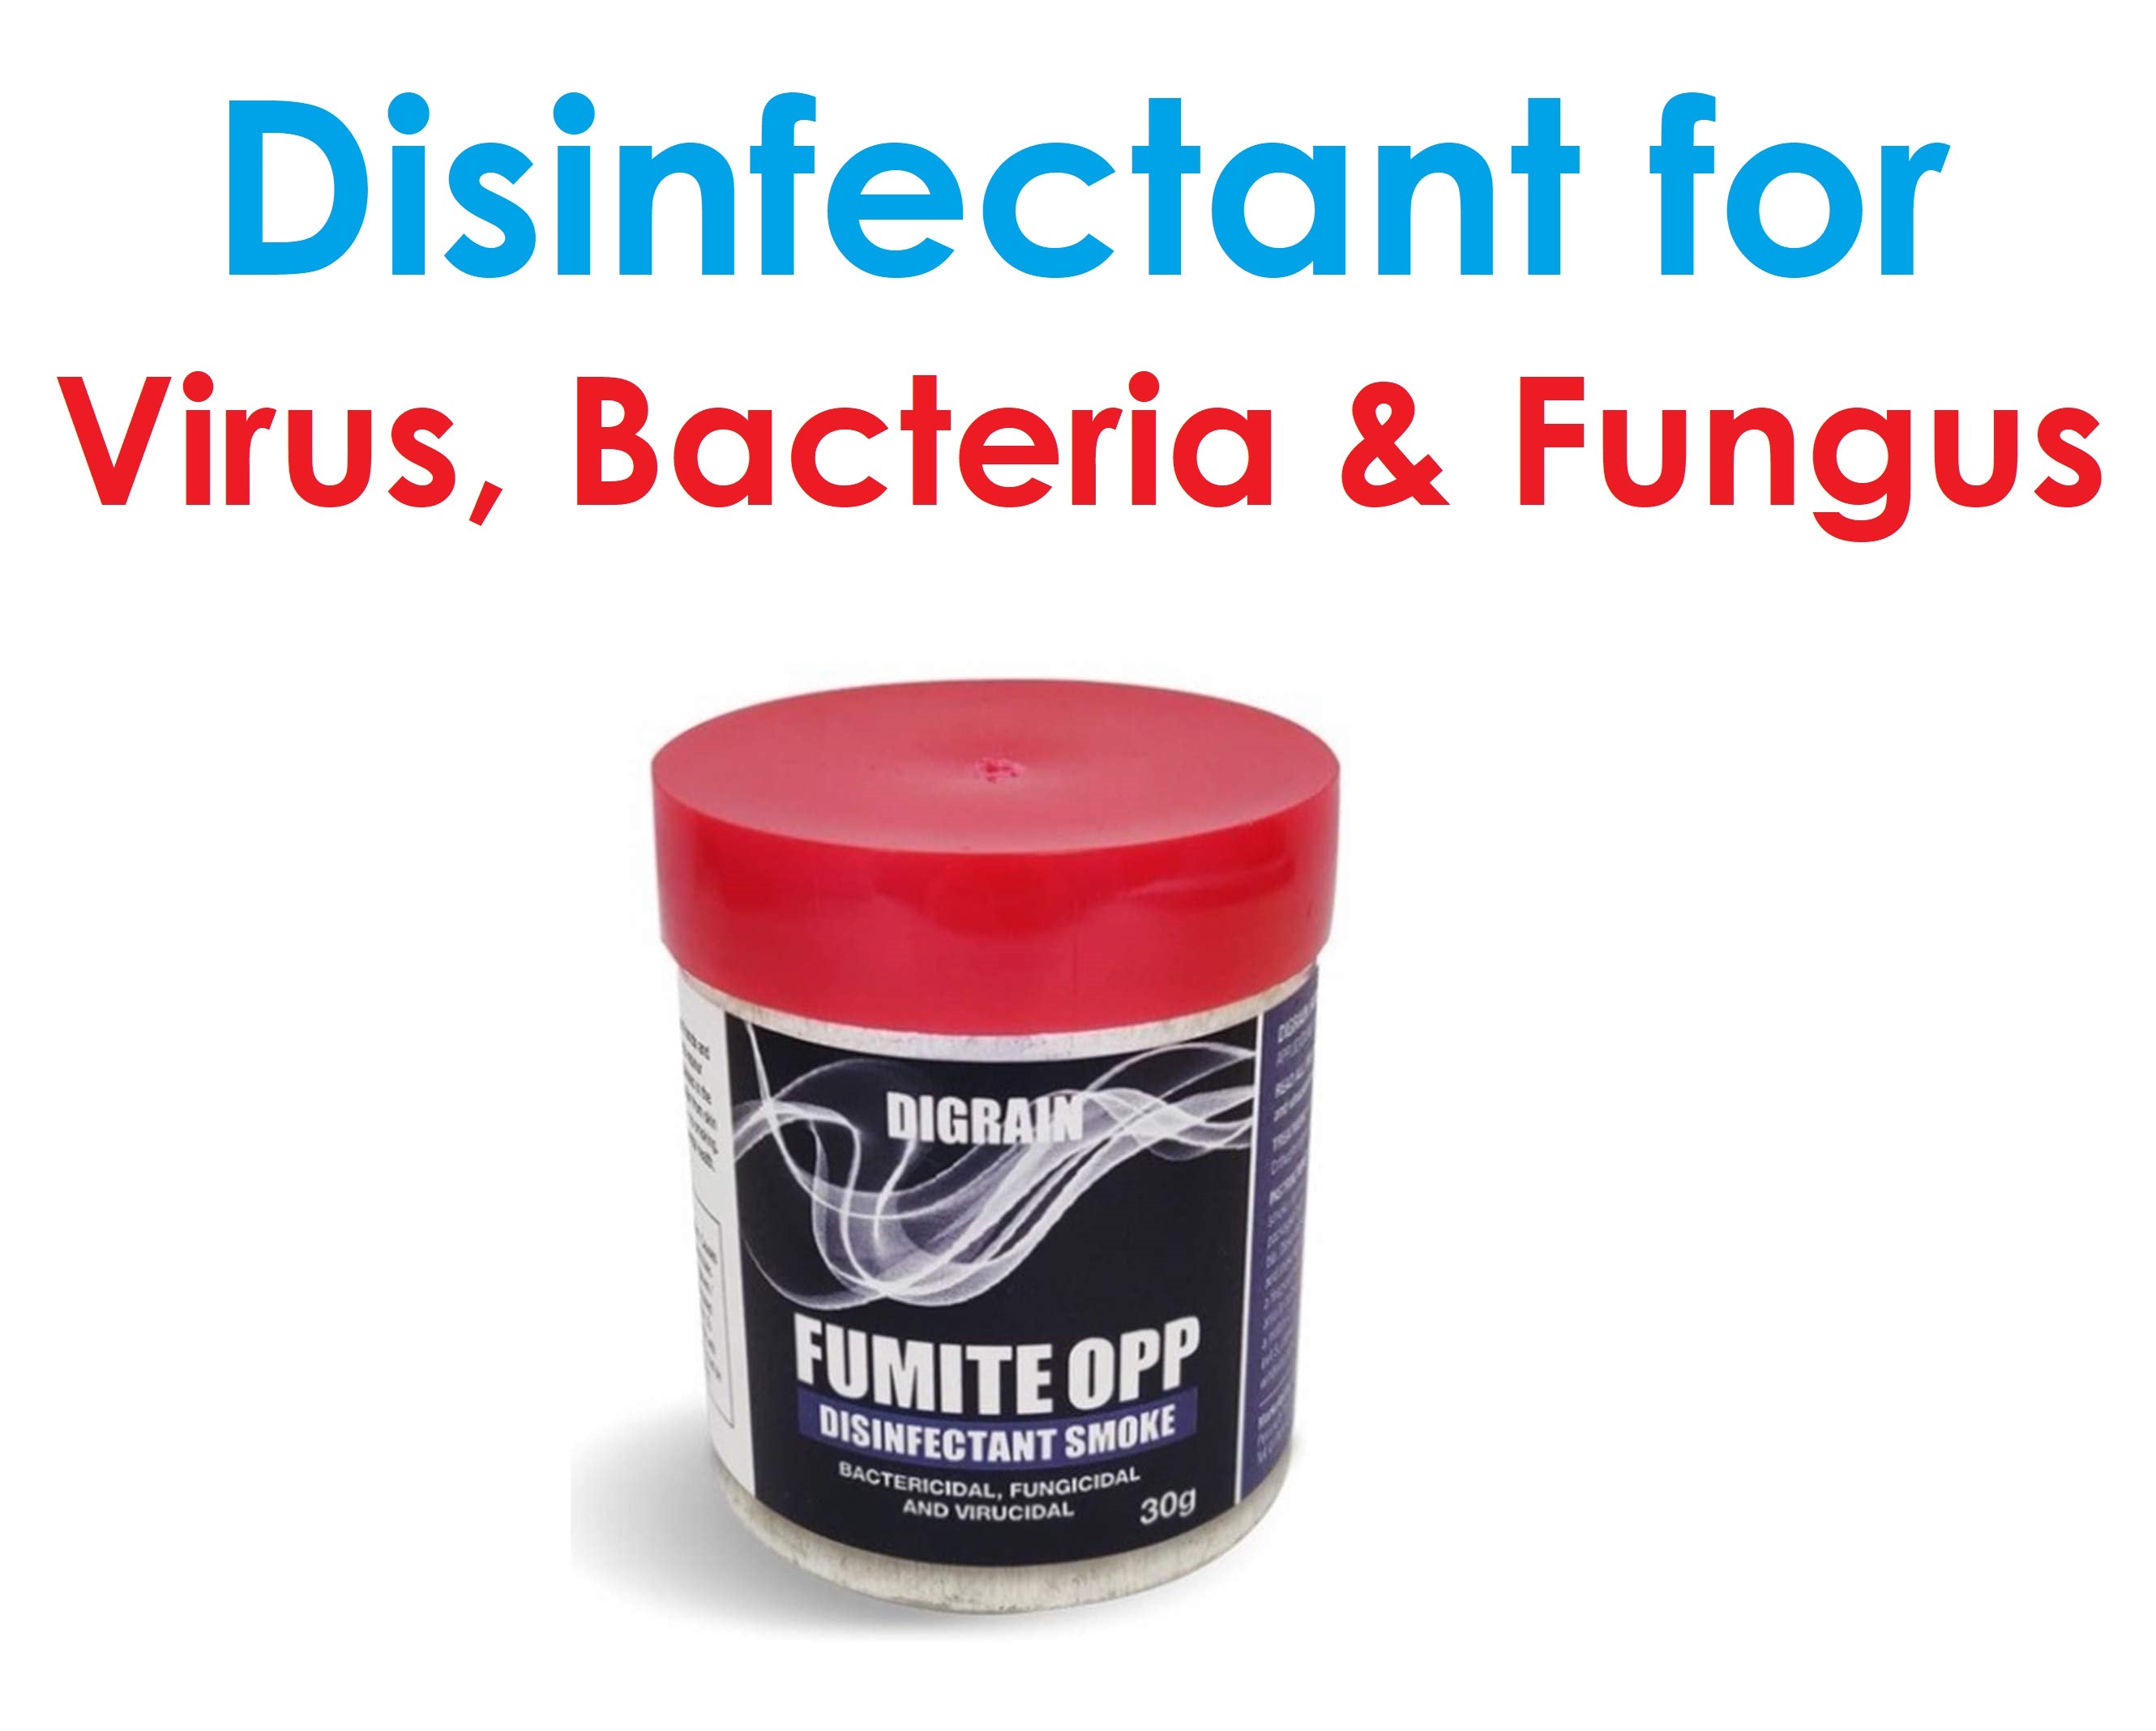 Digrain Fumite OPP Disinfectant Smoke 30g Kills Bacteria E.coli in Rooms Kennels - Moth Control